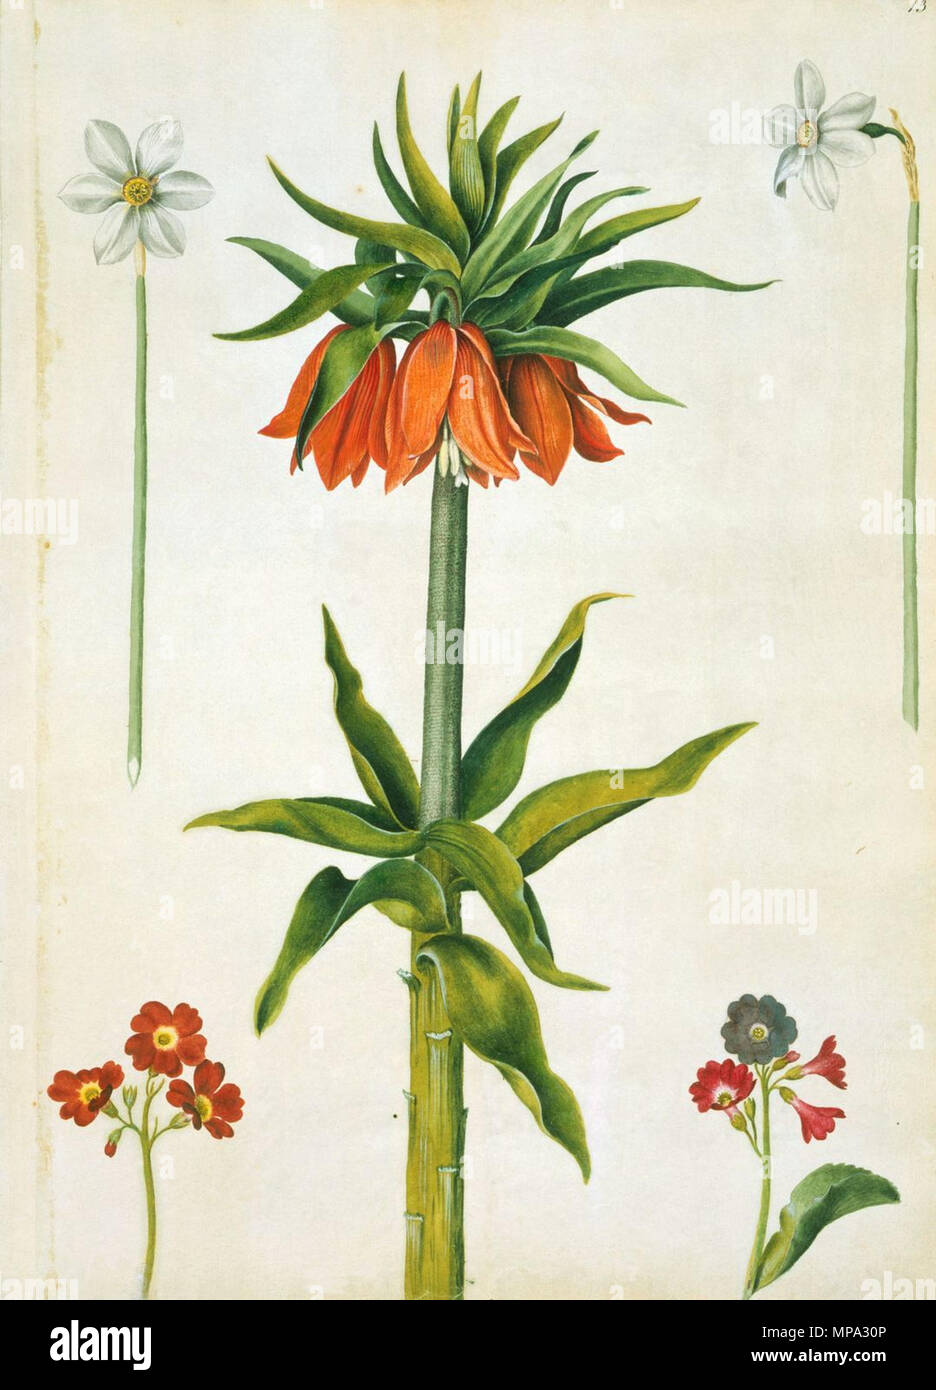 . English: Crown imperial, narcissi and auriculas . between 1650 and 1682. Alexander Marshal 864 Marshal - Crown imperial, narcissi and auriculas Stock Photo